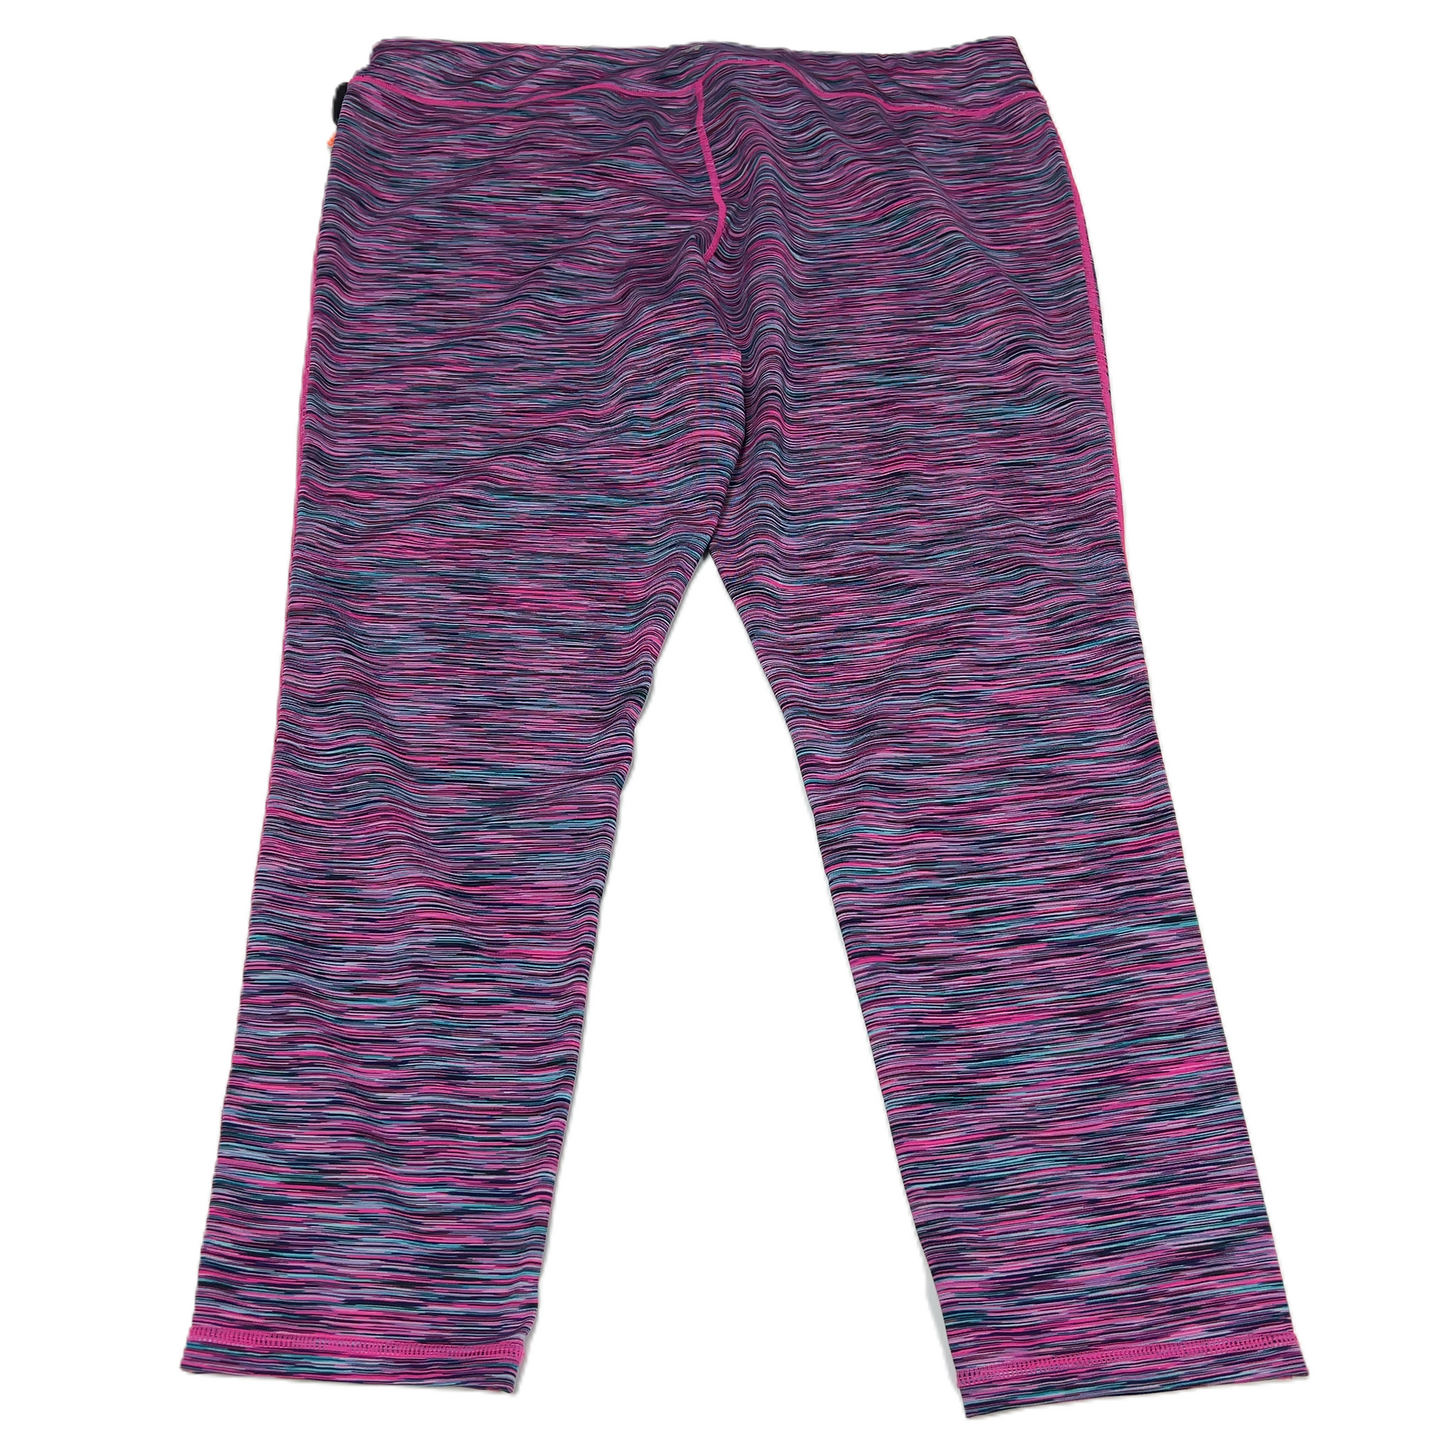 Athletic Leggings Capris By Ideology  Size: 3x